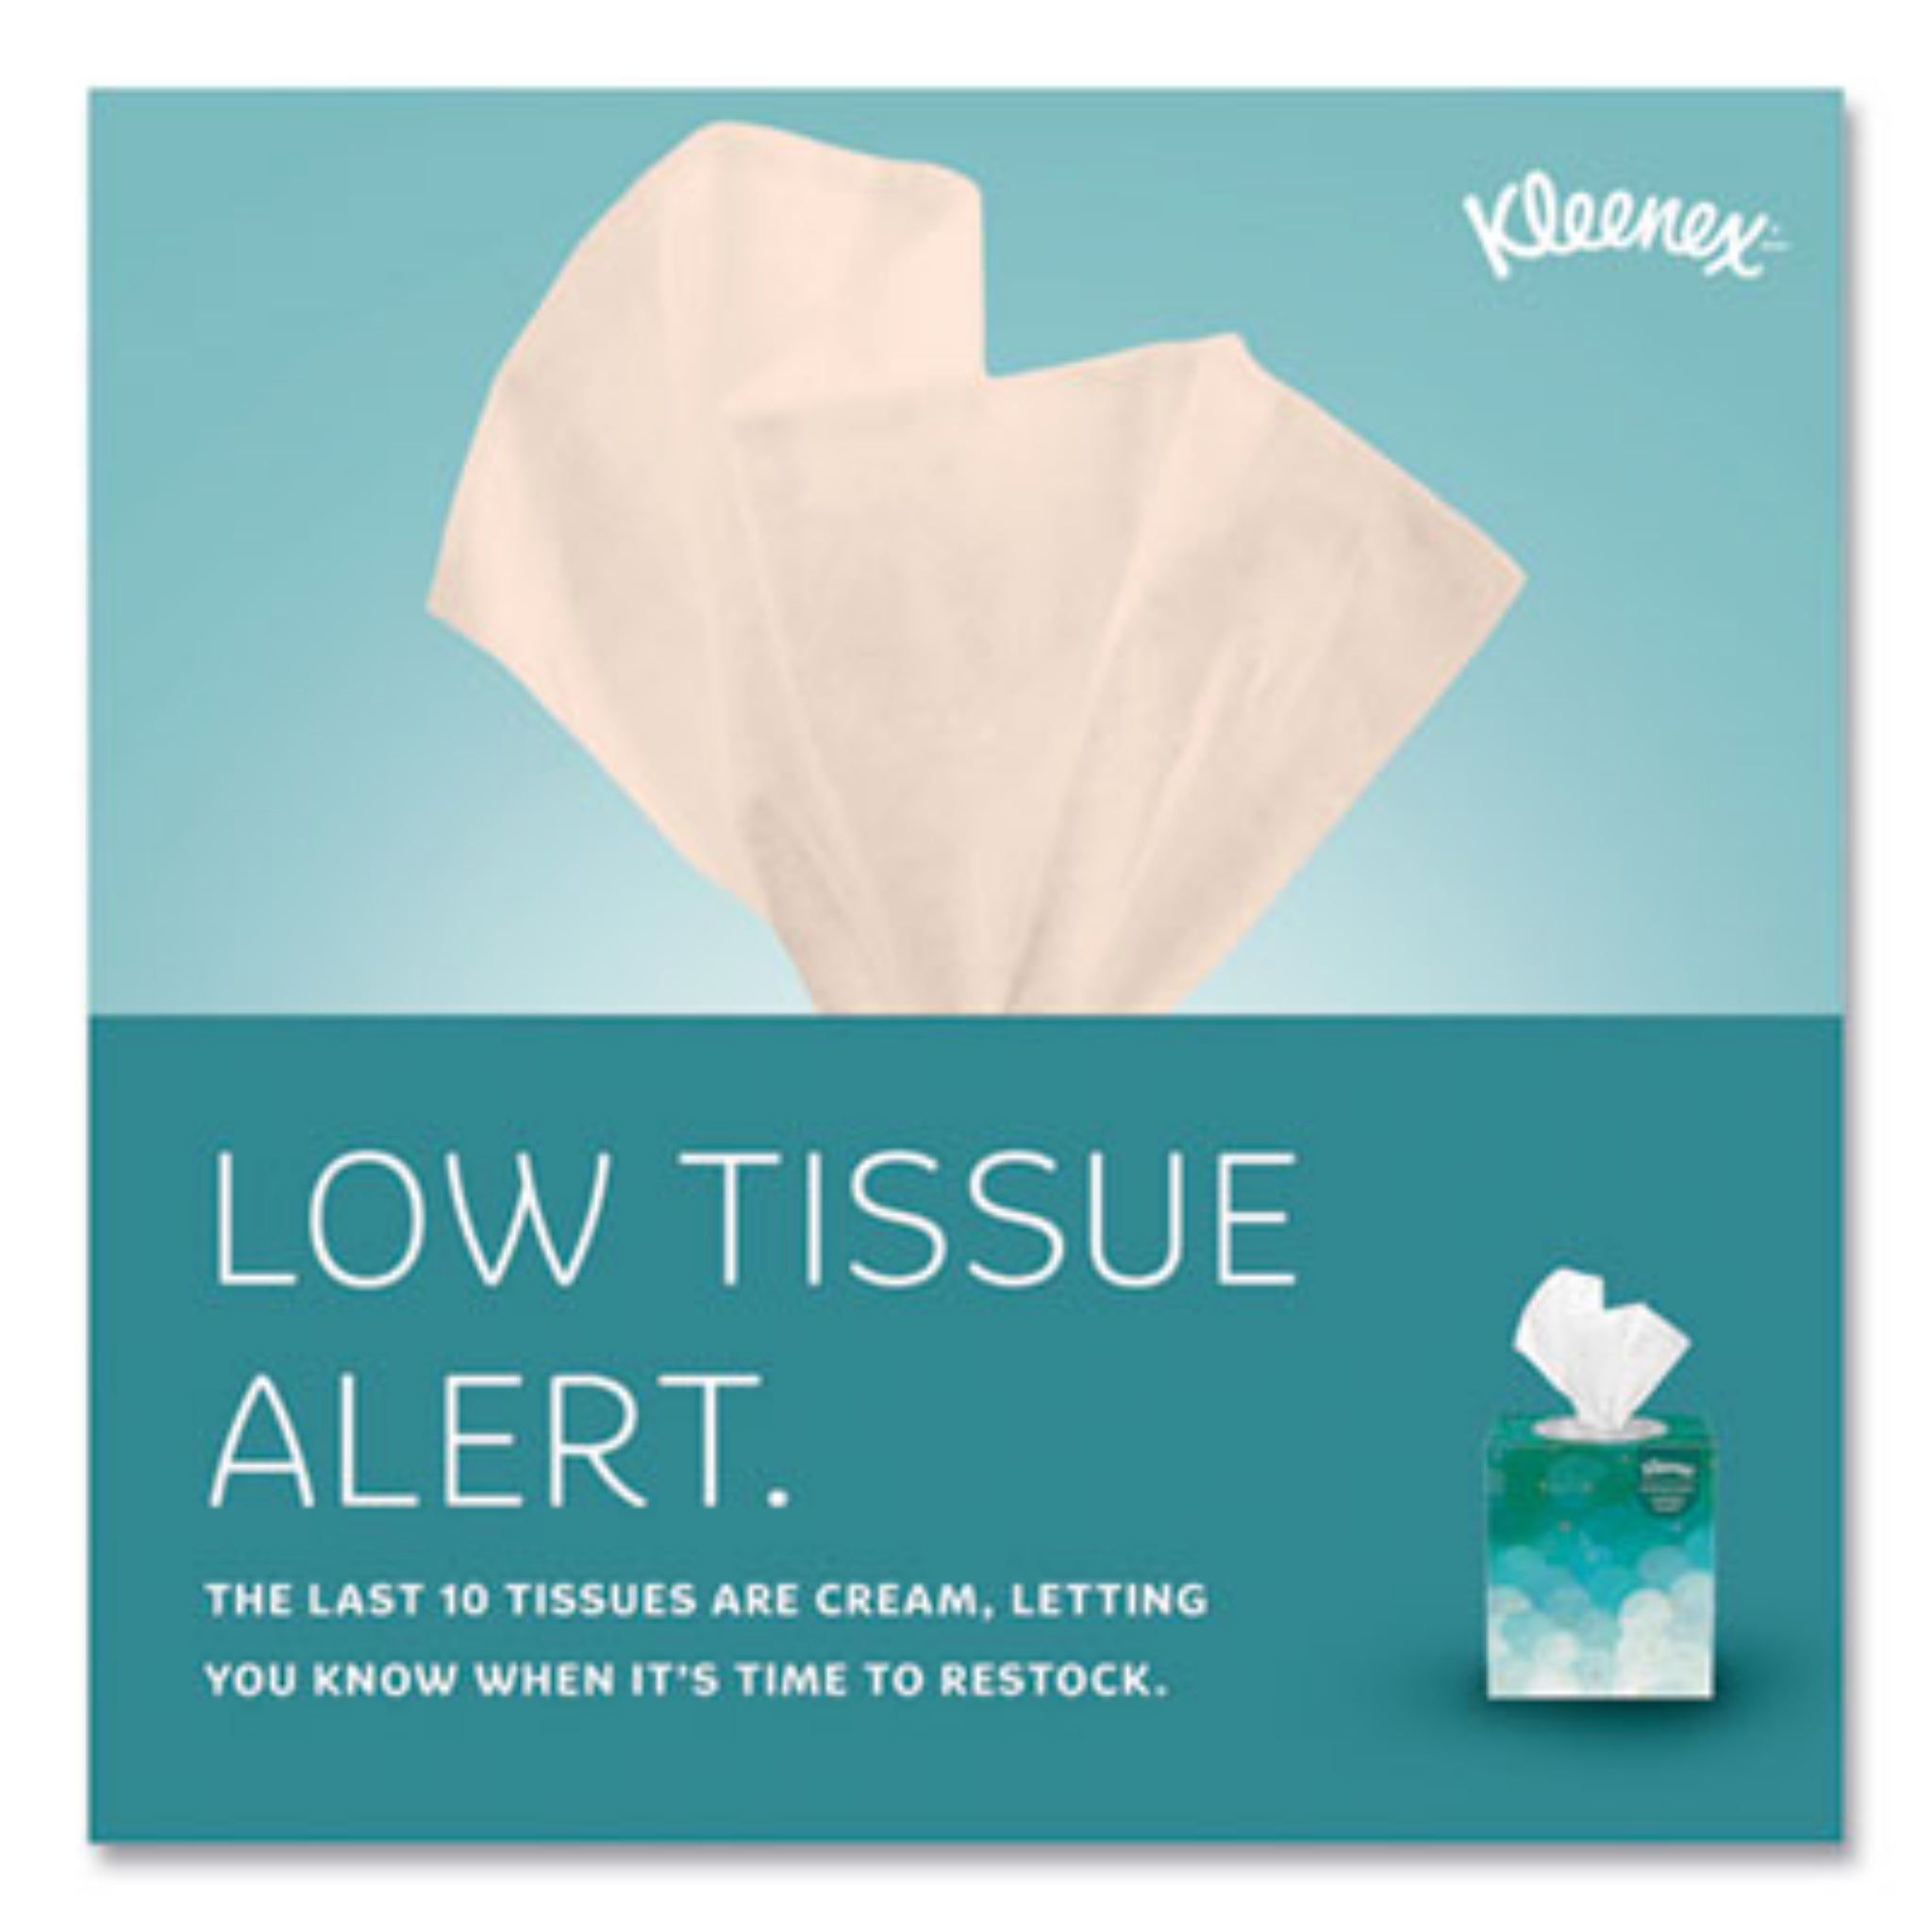 KIMBERLY-CLARK Kleenex 21270CT Boutique White Facial Tissue for Business, Low Tissue Alert